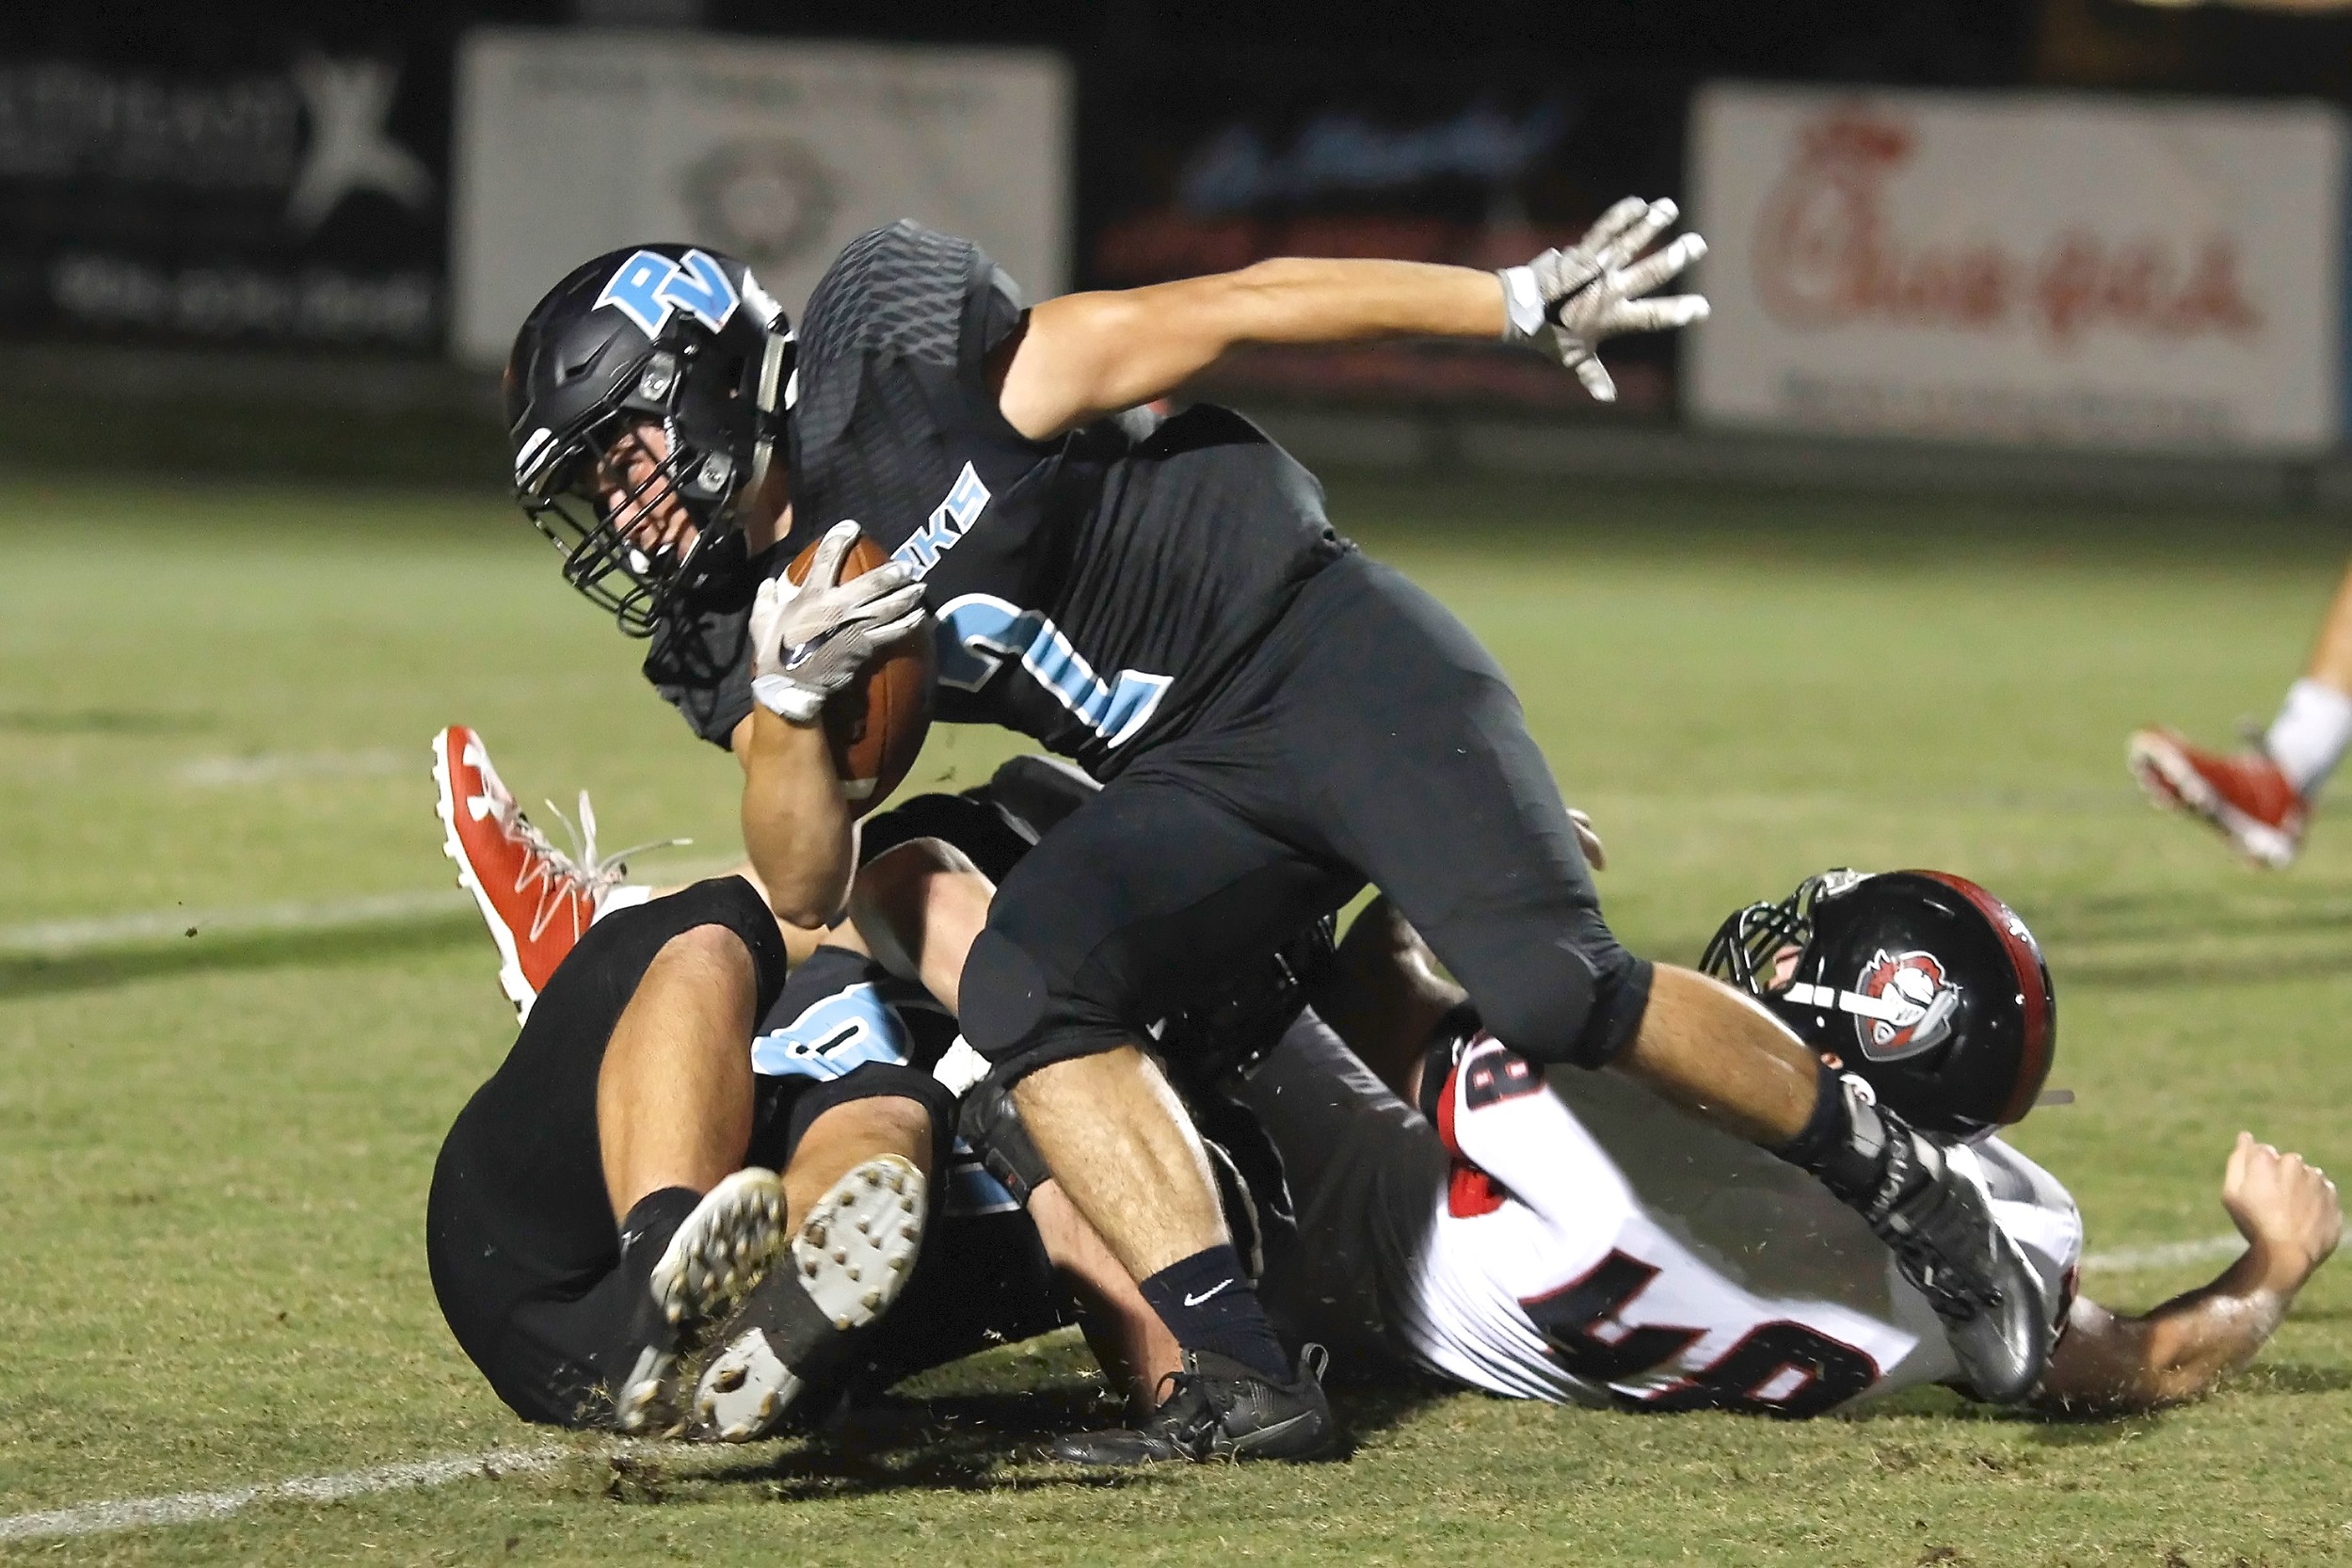 #2 Zach Walton fights for a few more yards for Ponte Vedra.